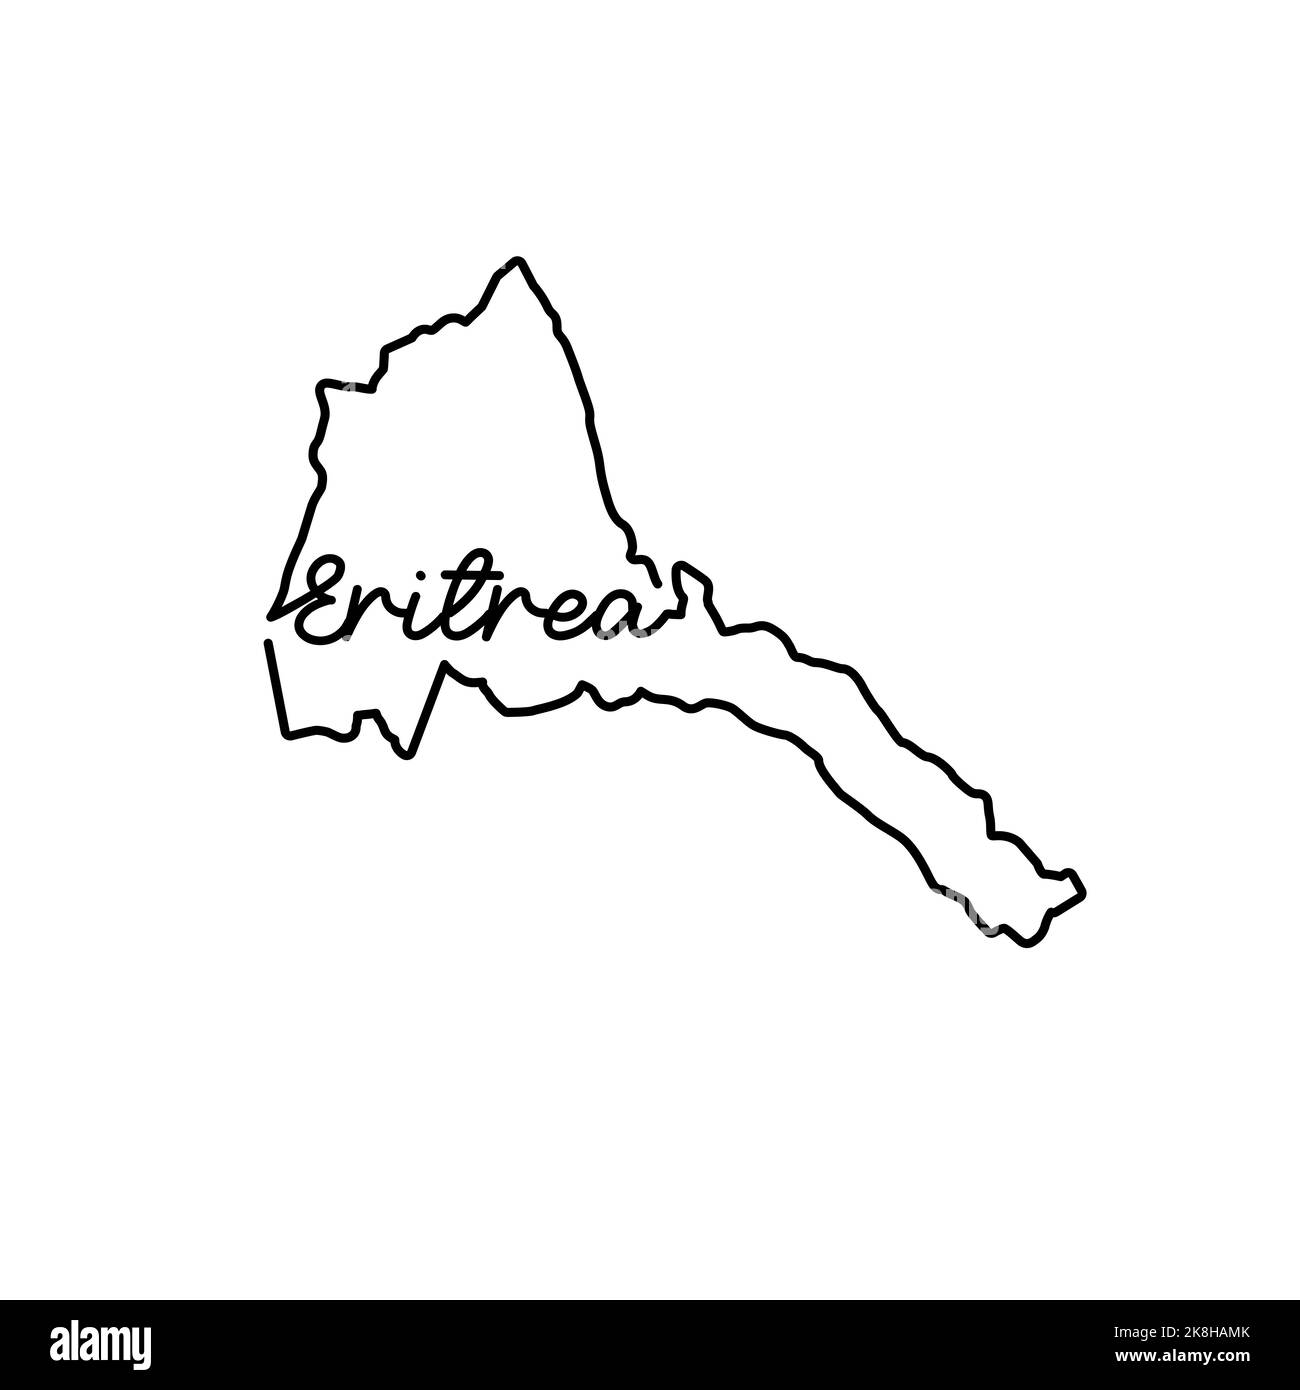 Eritrea outline map with the handwritten country name. Continuous line drawing of patriotic home sign. A love for a small homeland. T-shirt print idea Stock Photo